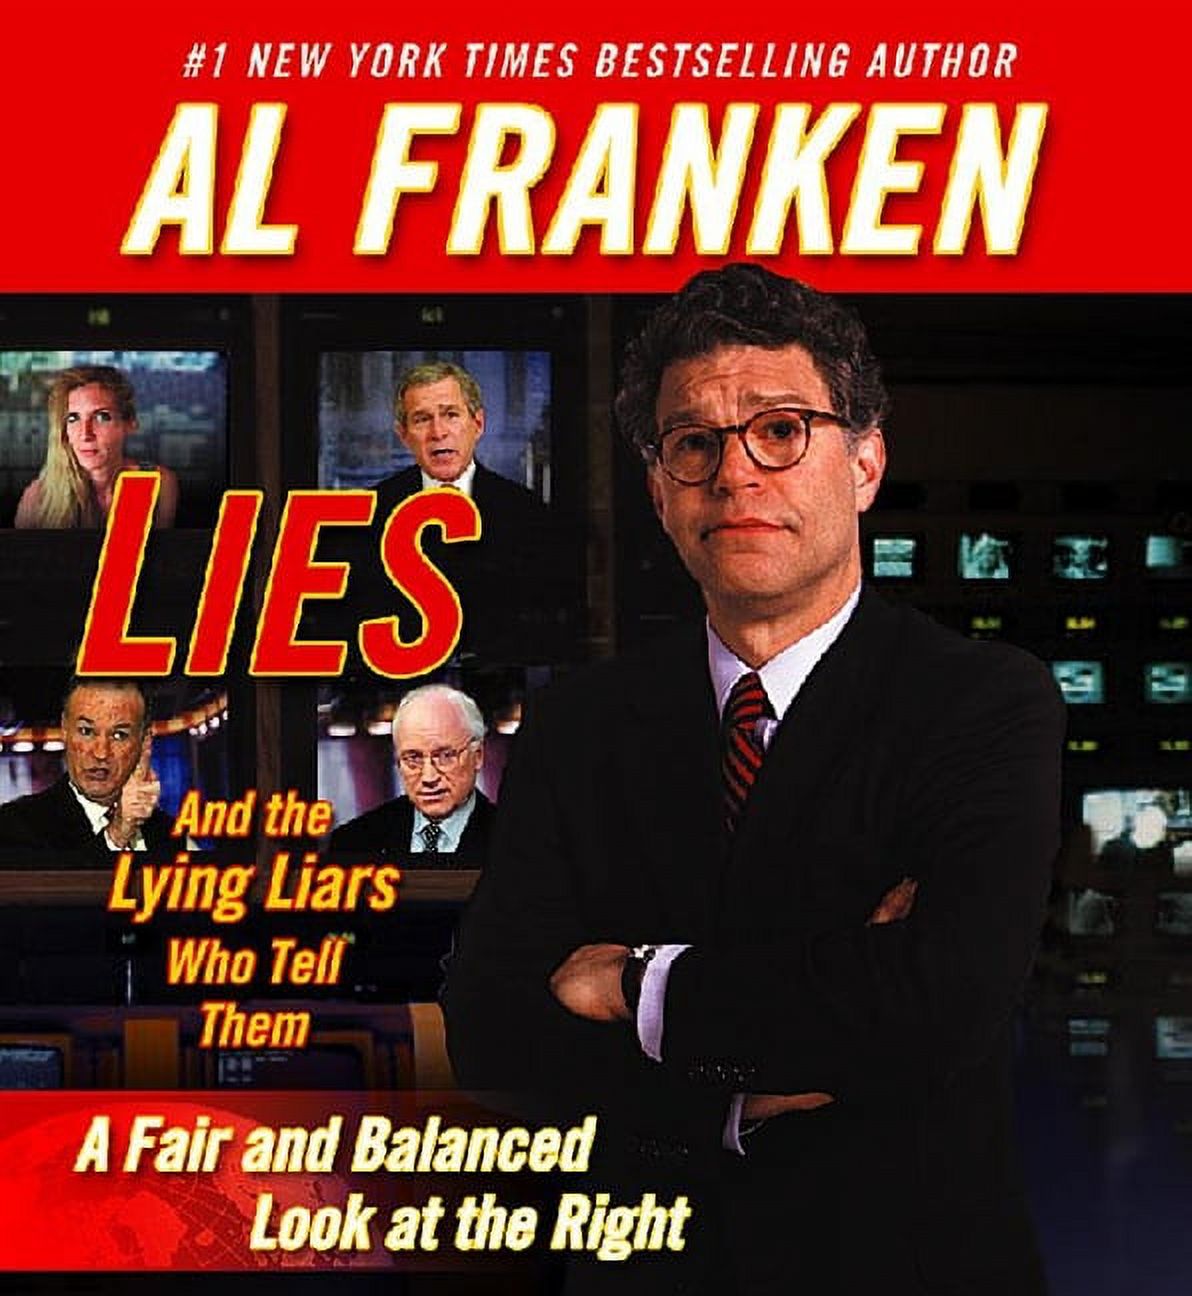 Lies　Lying　Liars　A　Look　and　Tell　Them:　the　and　Balanced　at　Who　Right　Fair　the